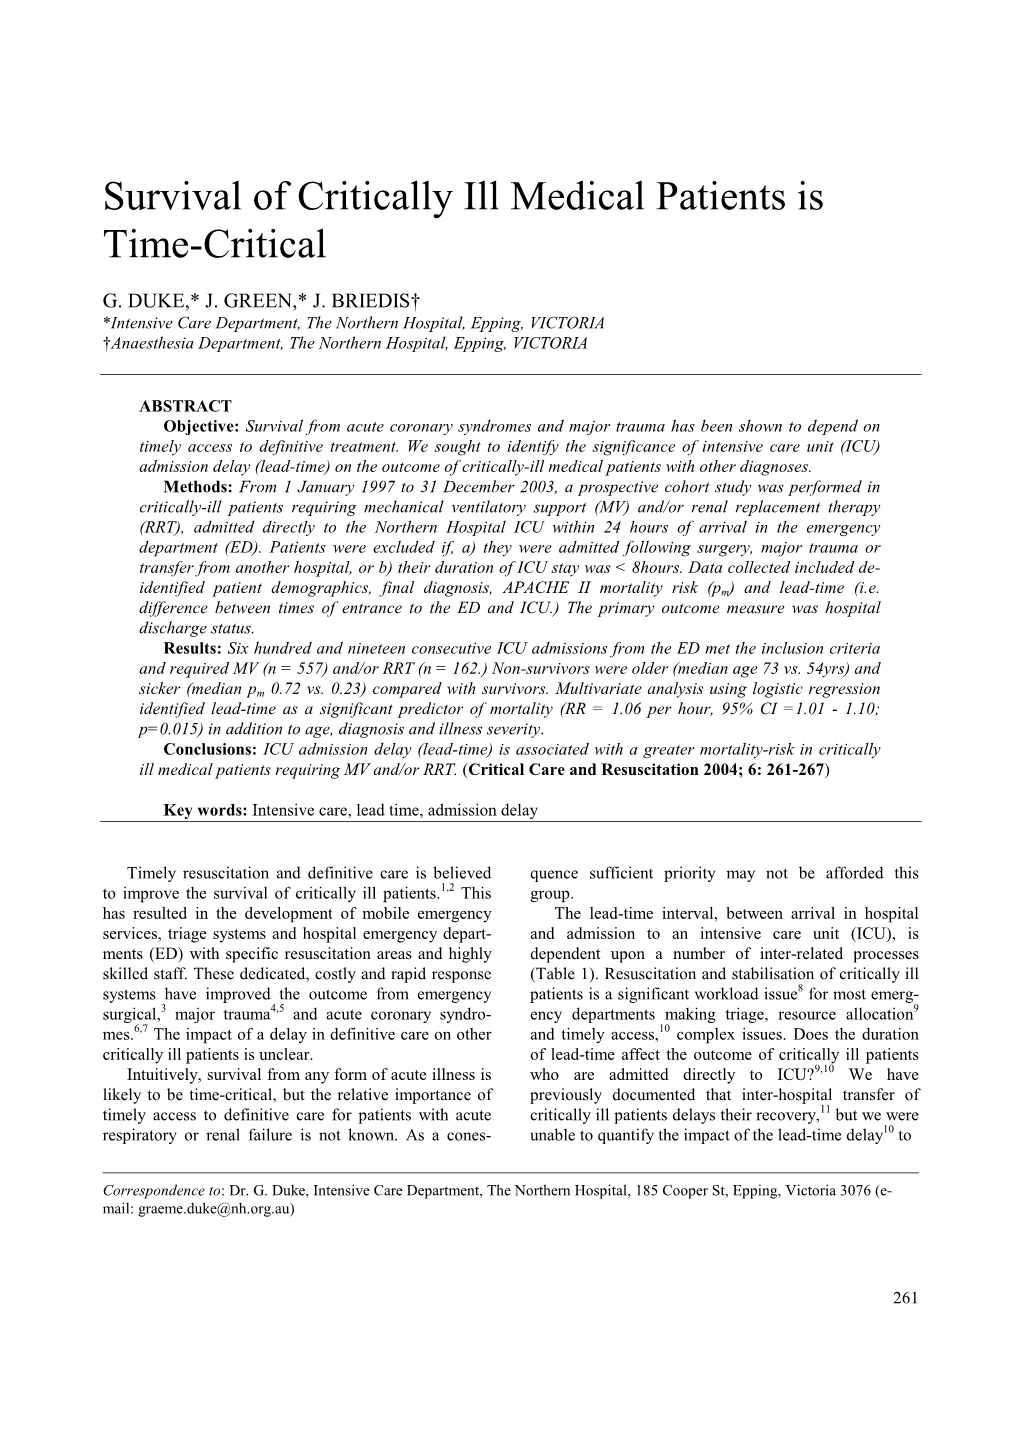 Survival of Critically Ill Medical Patients Is Time-Critical